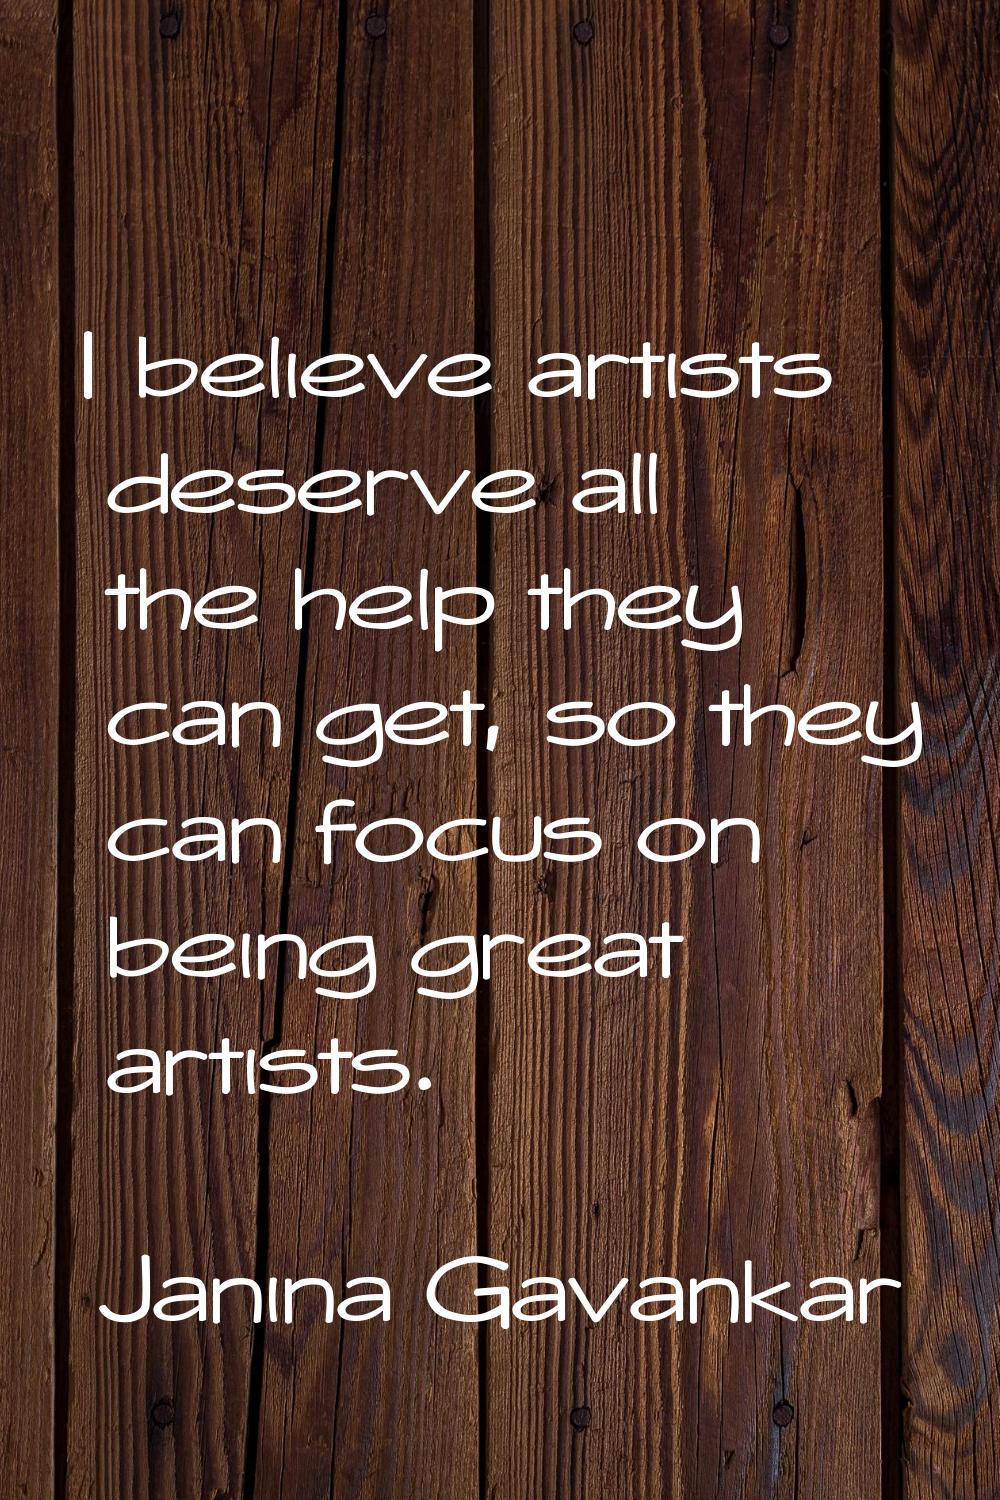 I believe artists deserve all the help they can get, so they can focus on being great artists.